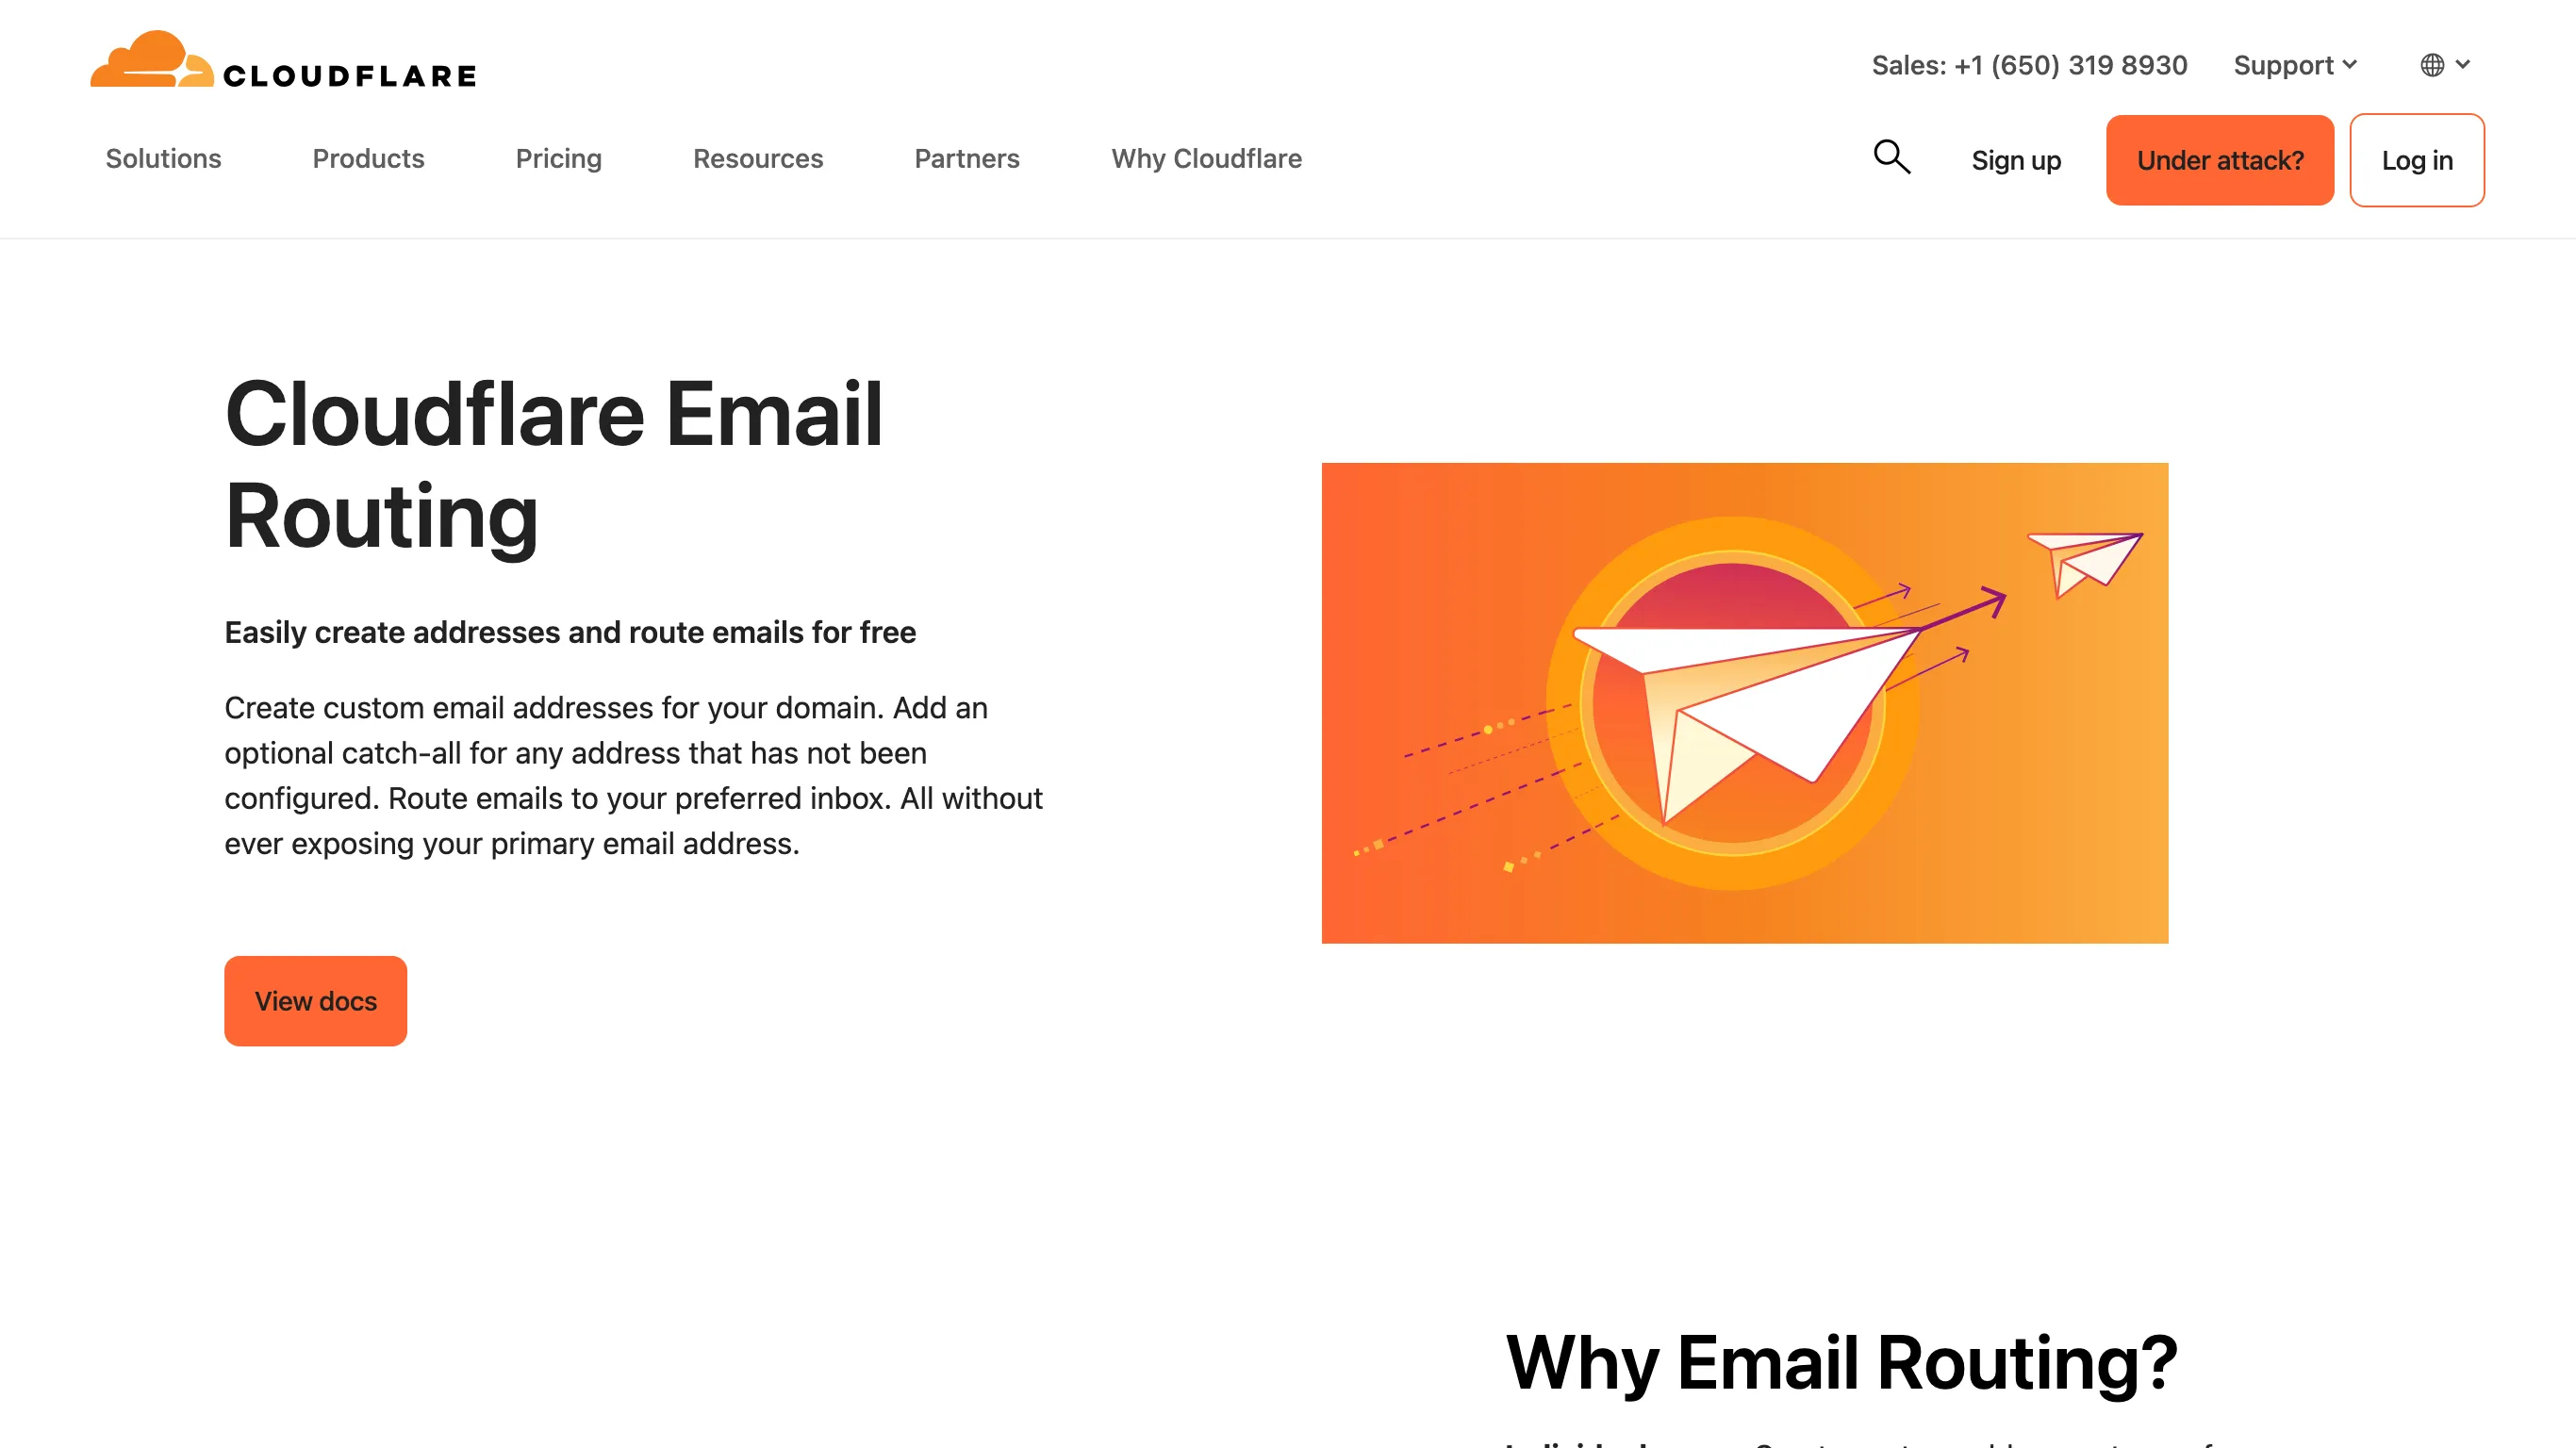 Cloudflare Email Routing is a closed-source email service.